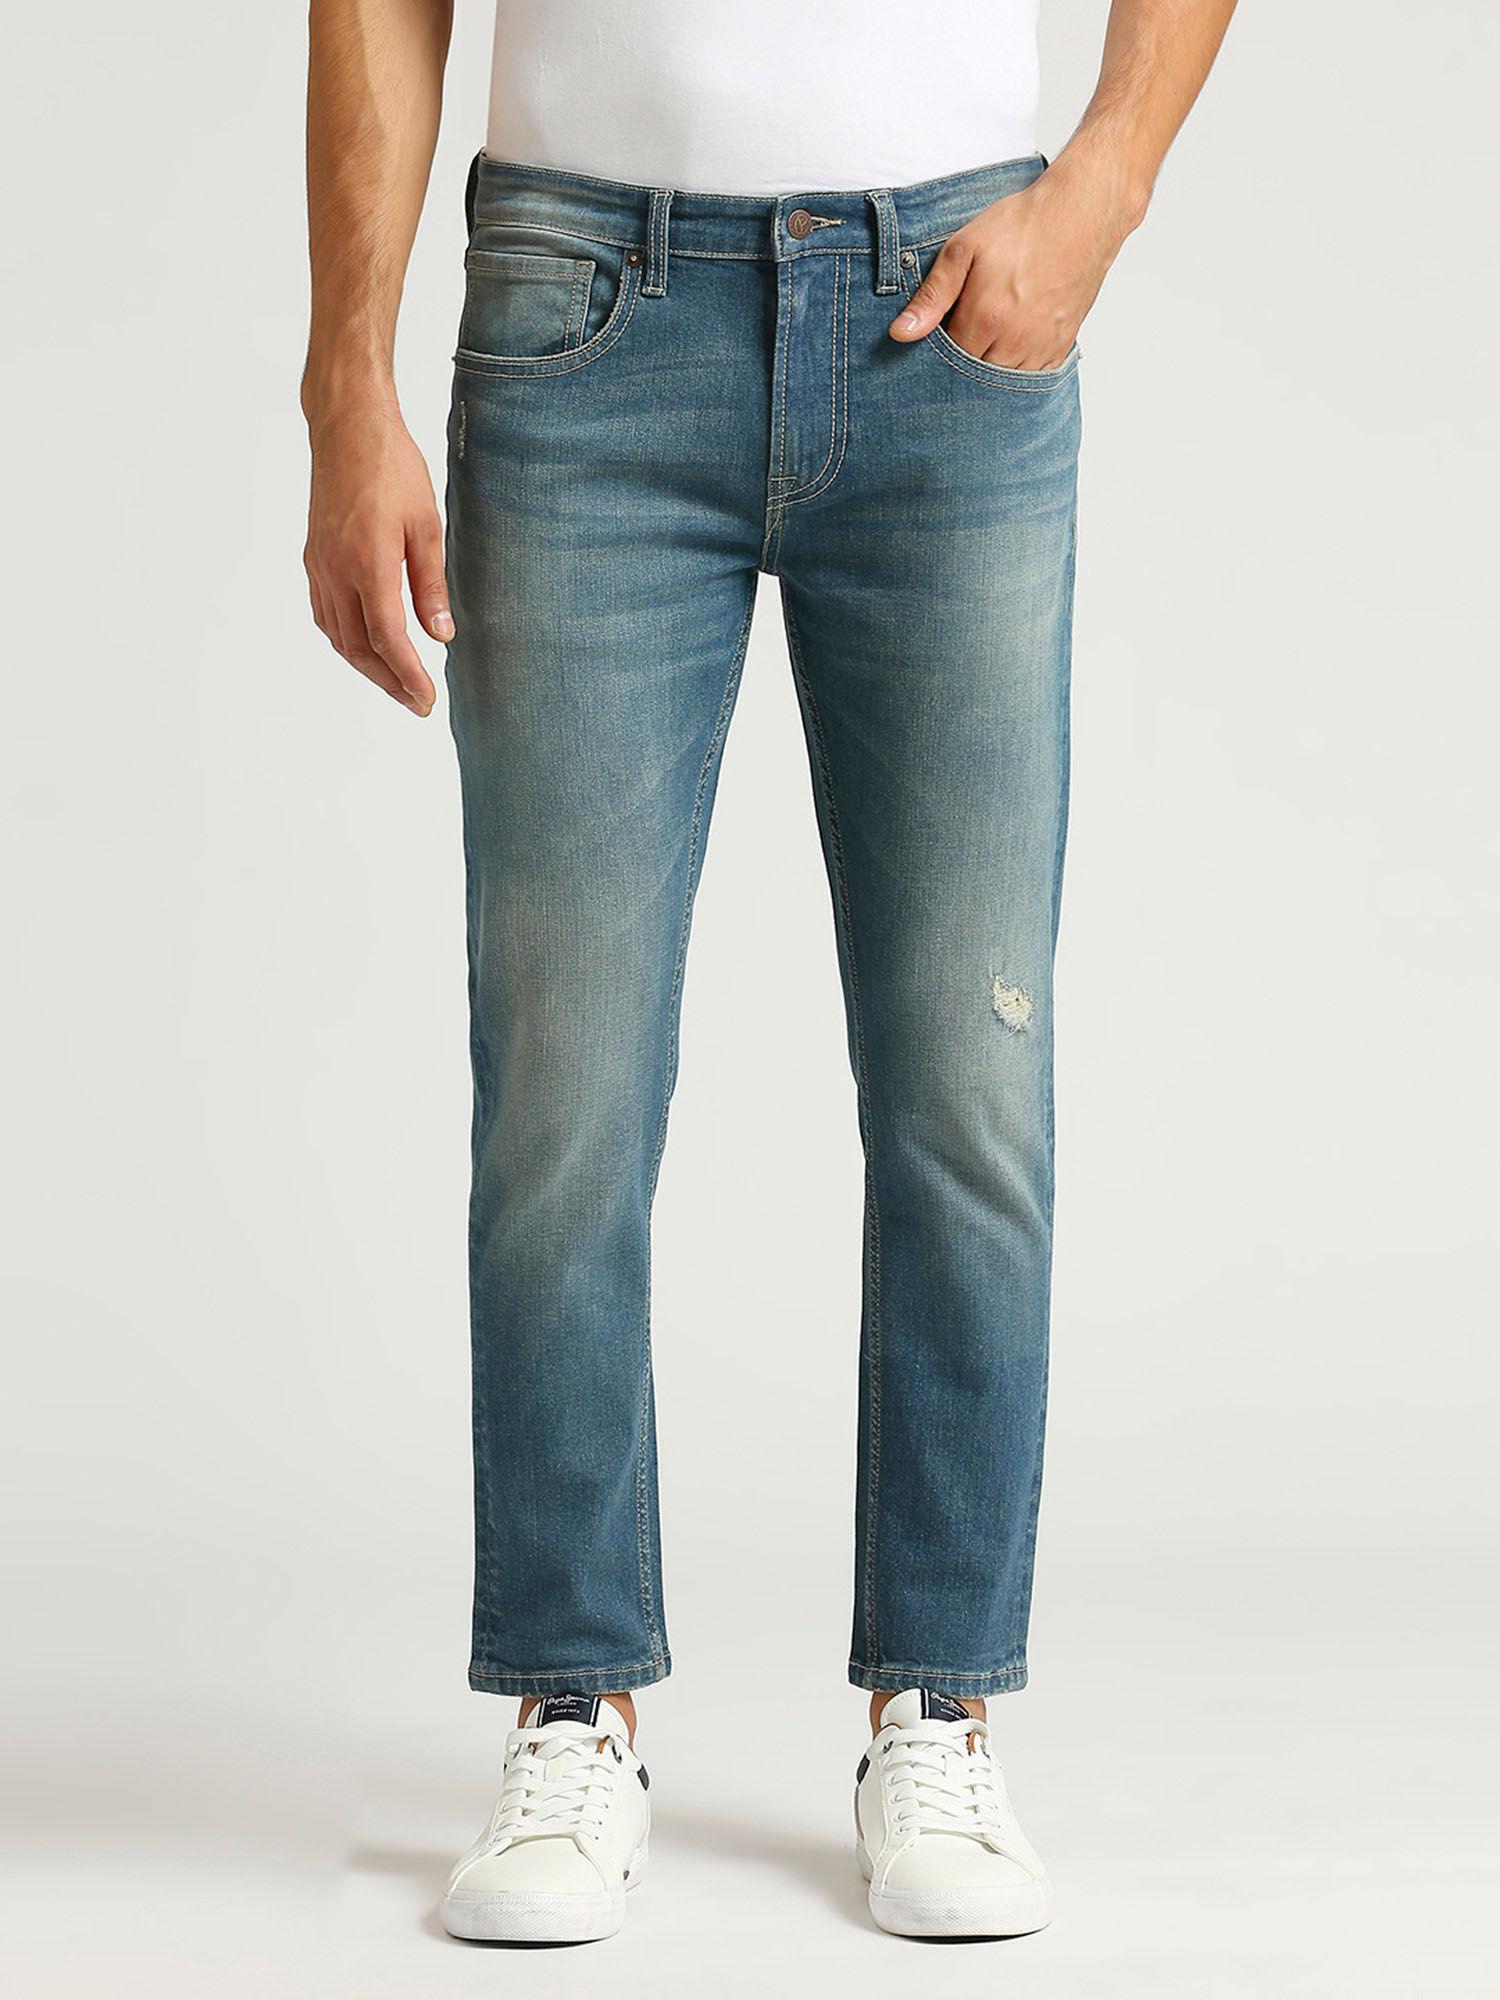 blue-chinox-ankle-super-skinny-fit-mid-waist-ankle-jeans